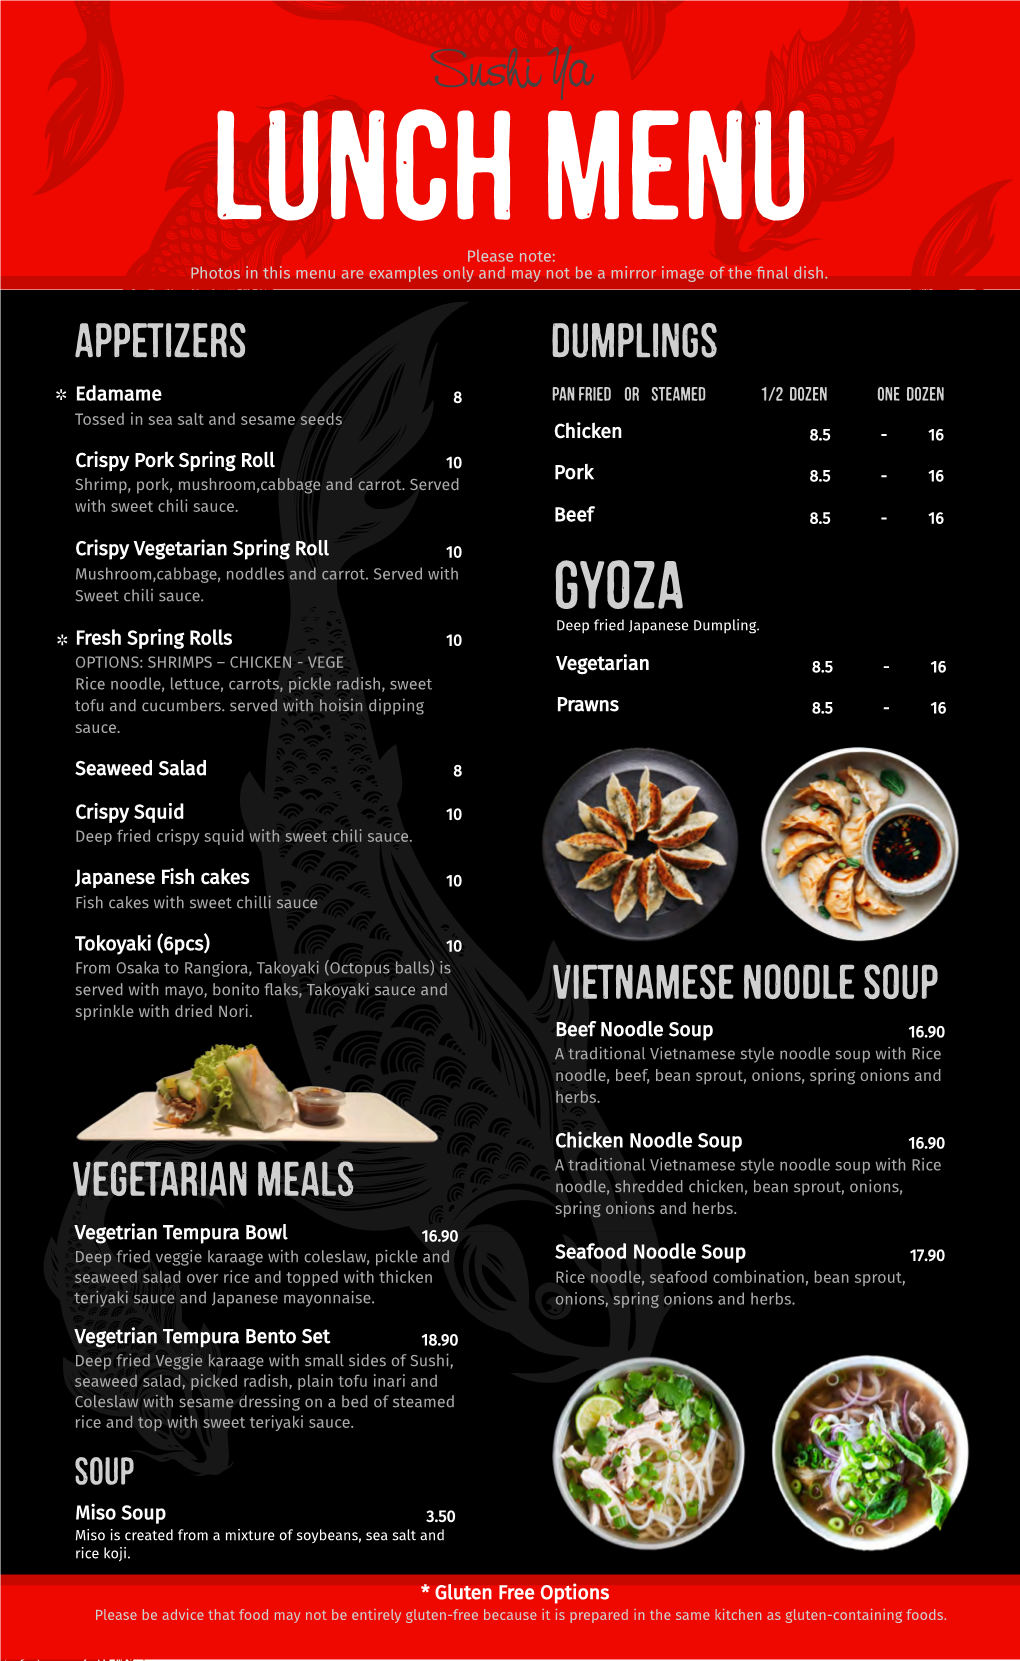 Sushi Ya Lunch Menu Please Note: Photos in This Menu Are Examples Only and May Not Be a Mirror Image of the �Nal Dish